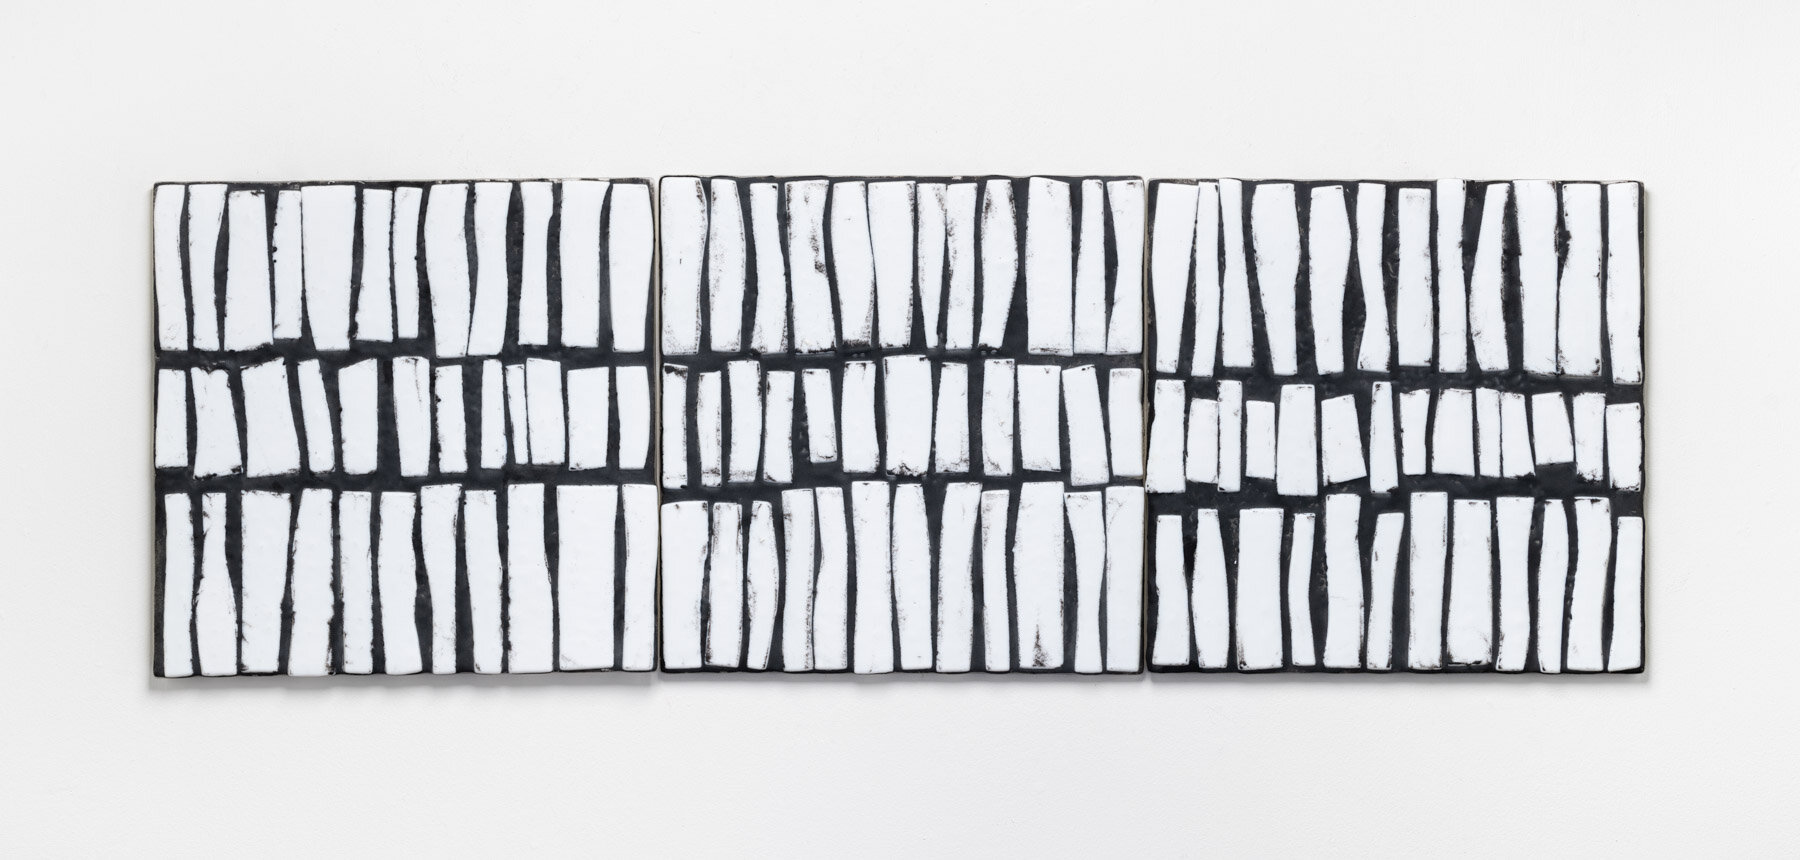 Interrupted (Crossings) 2019, Fused glass, triptych 12 x 36 inches -web.jpg